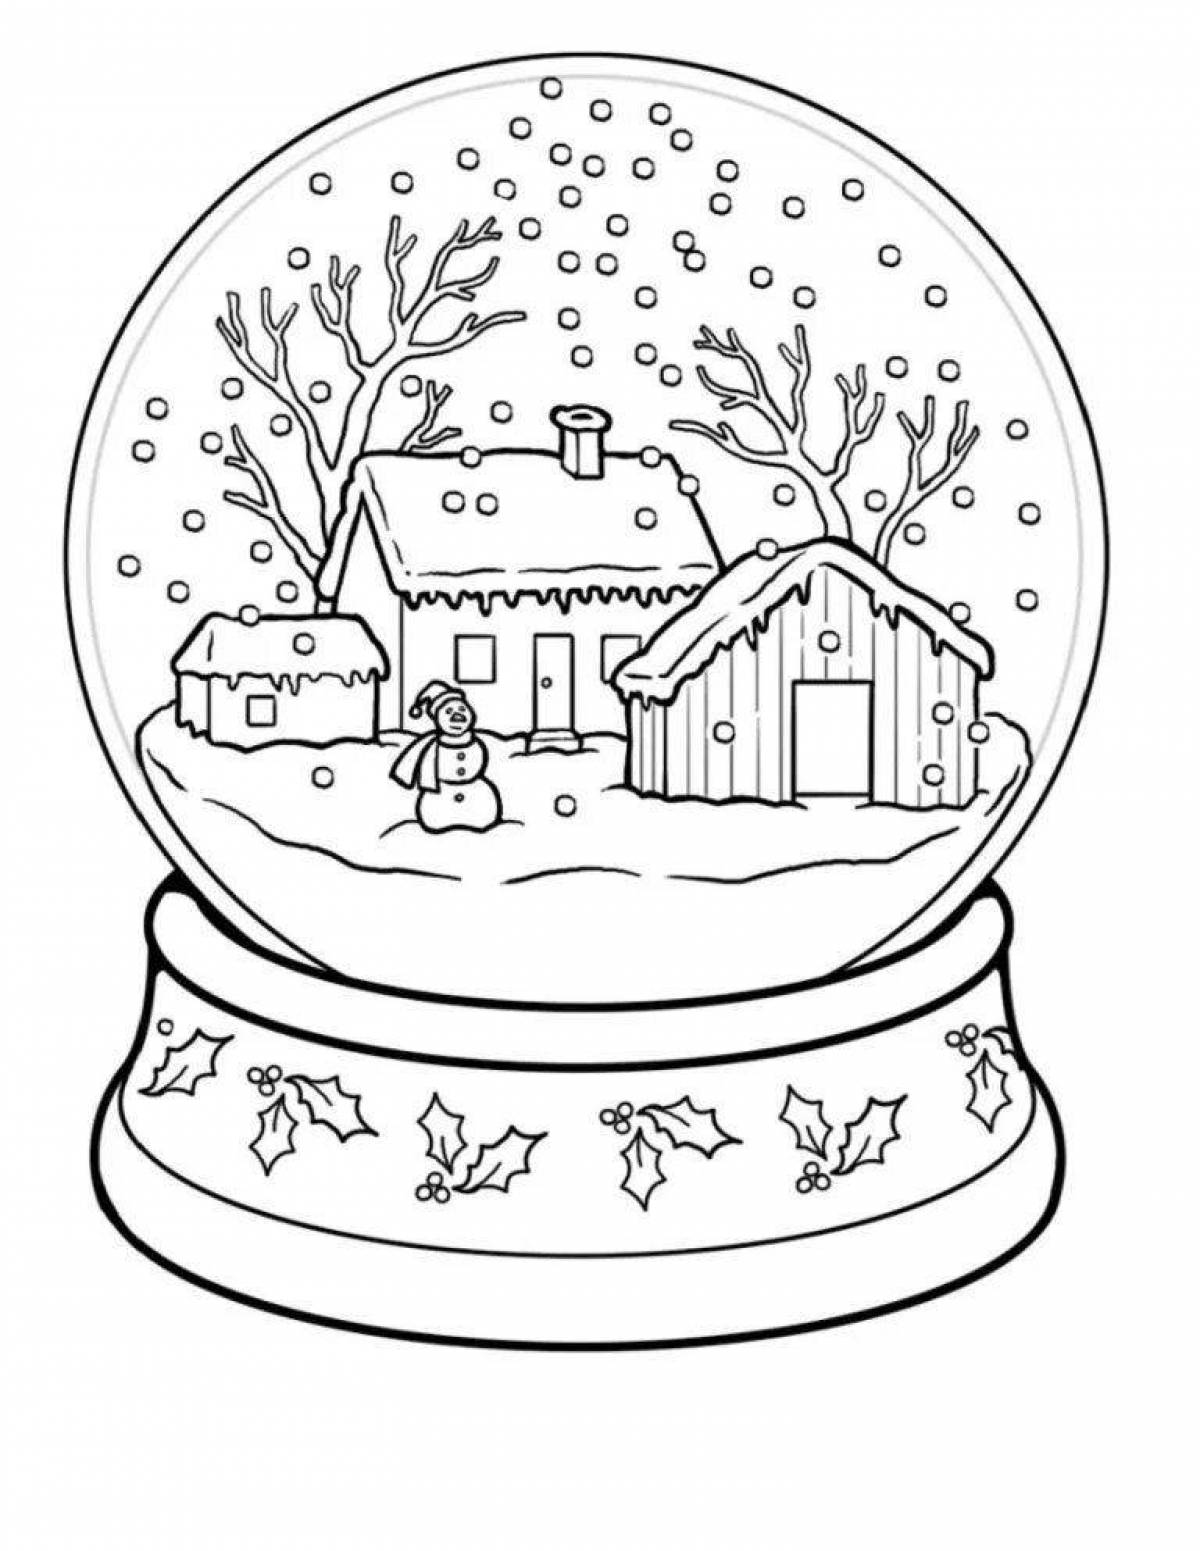 Serendipitous coloring pages beautiful for the new year